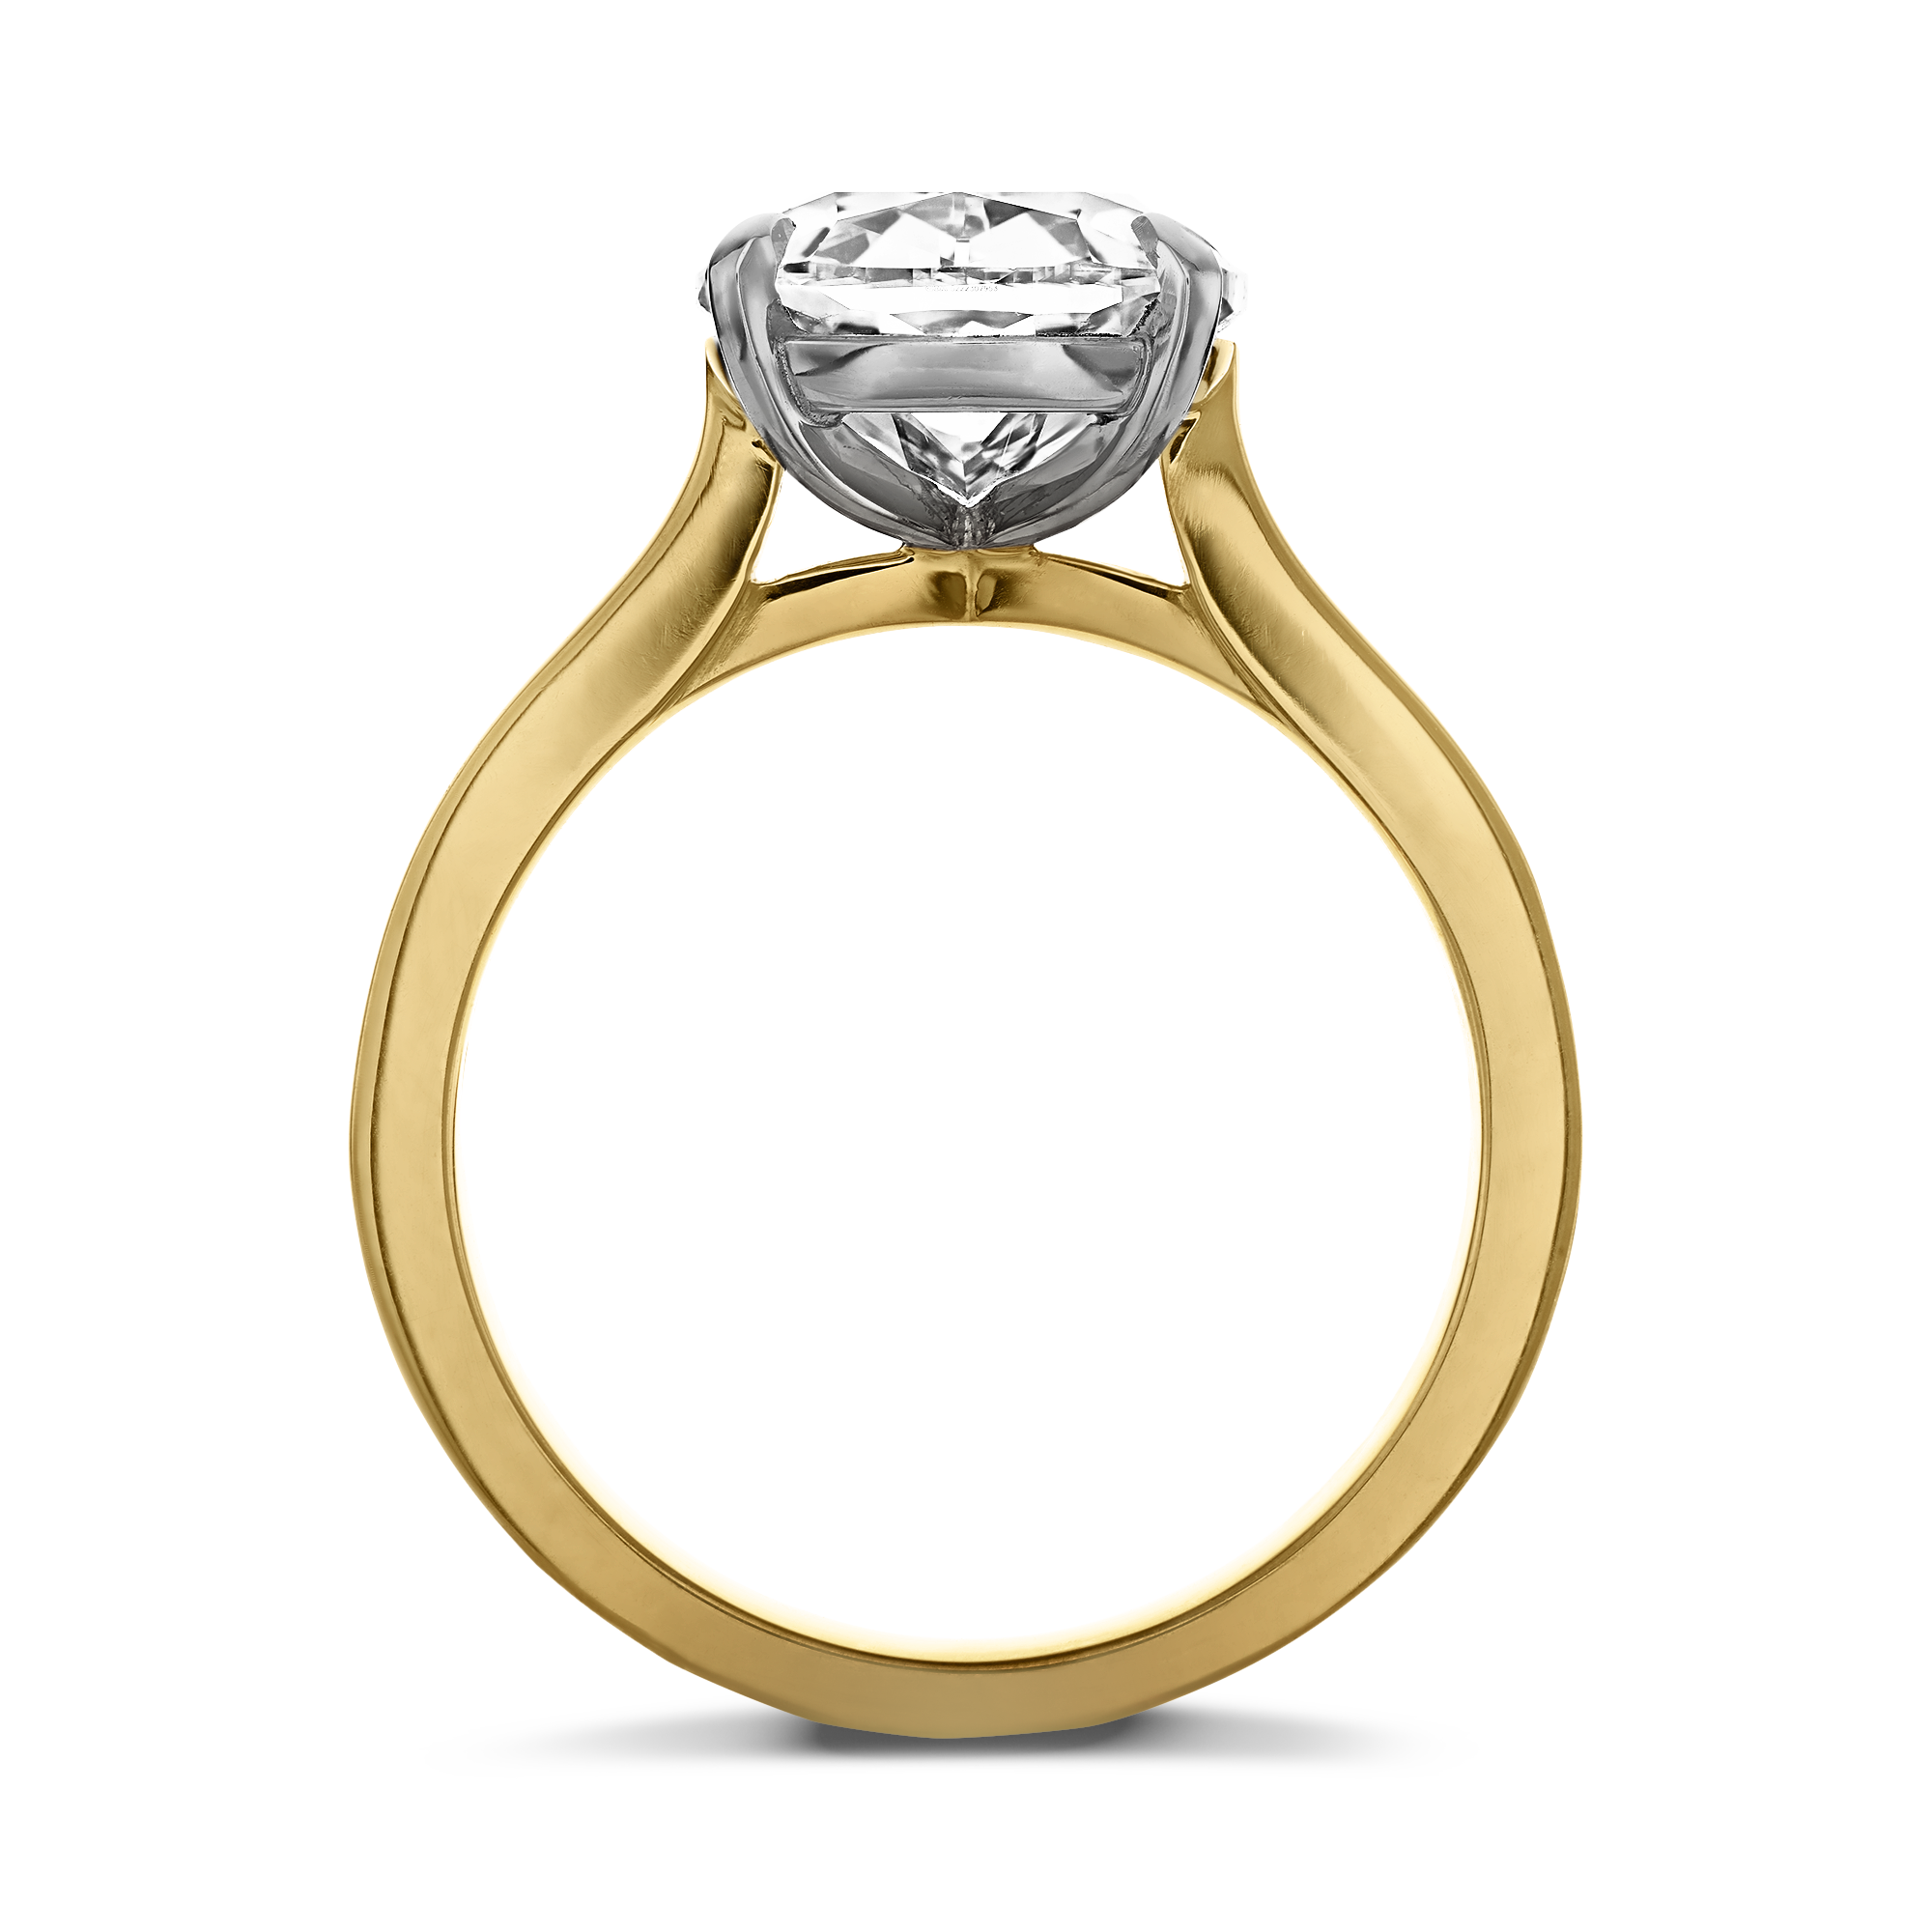 Masterpiece Deco Setting 5.02ct Diamond Solitaire Ring Cushion Antique Cut, Claw Set_3